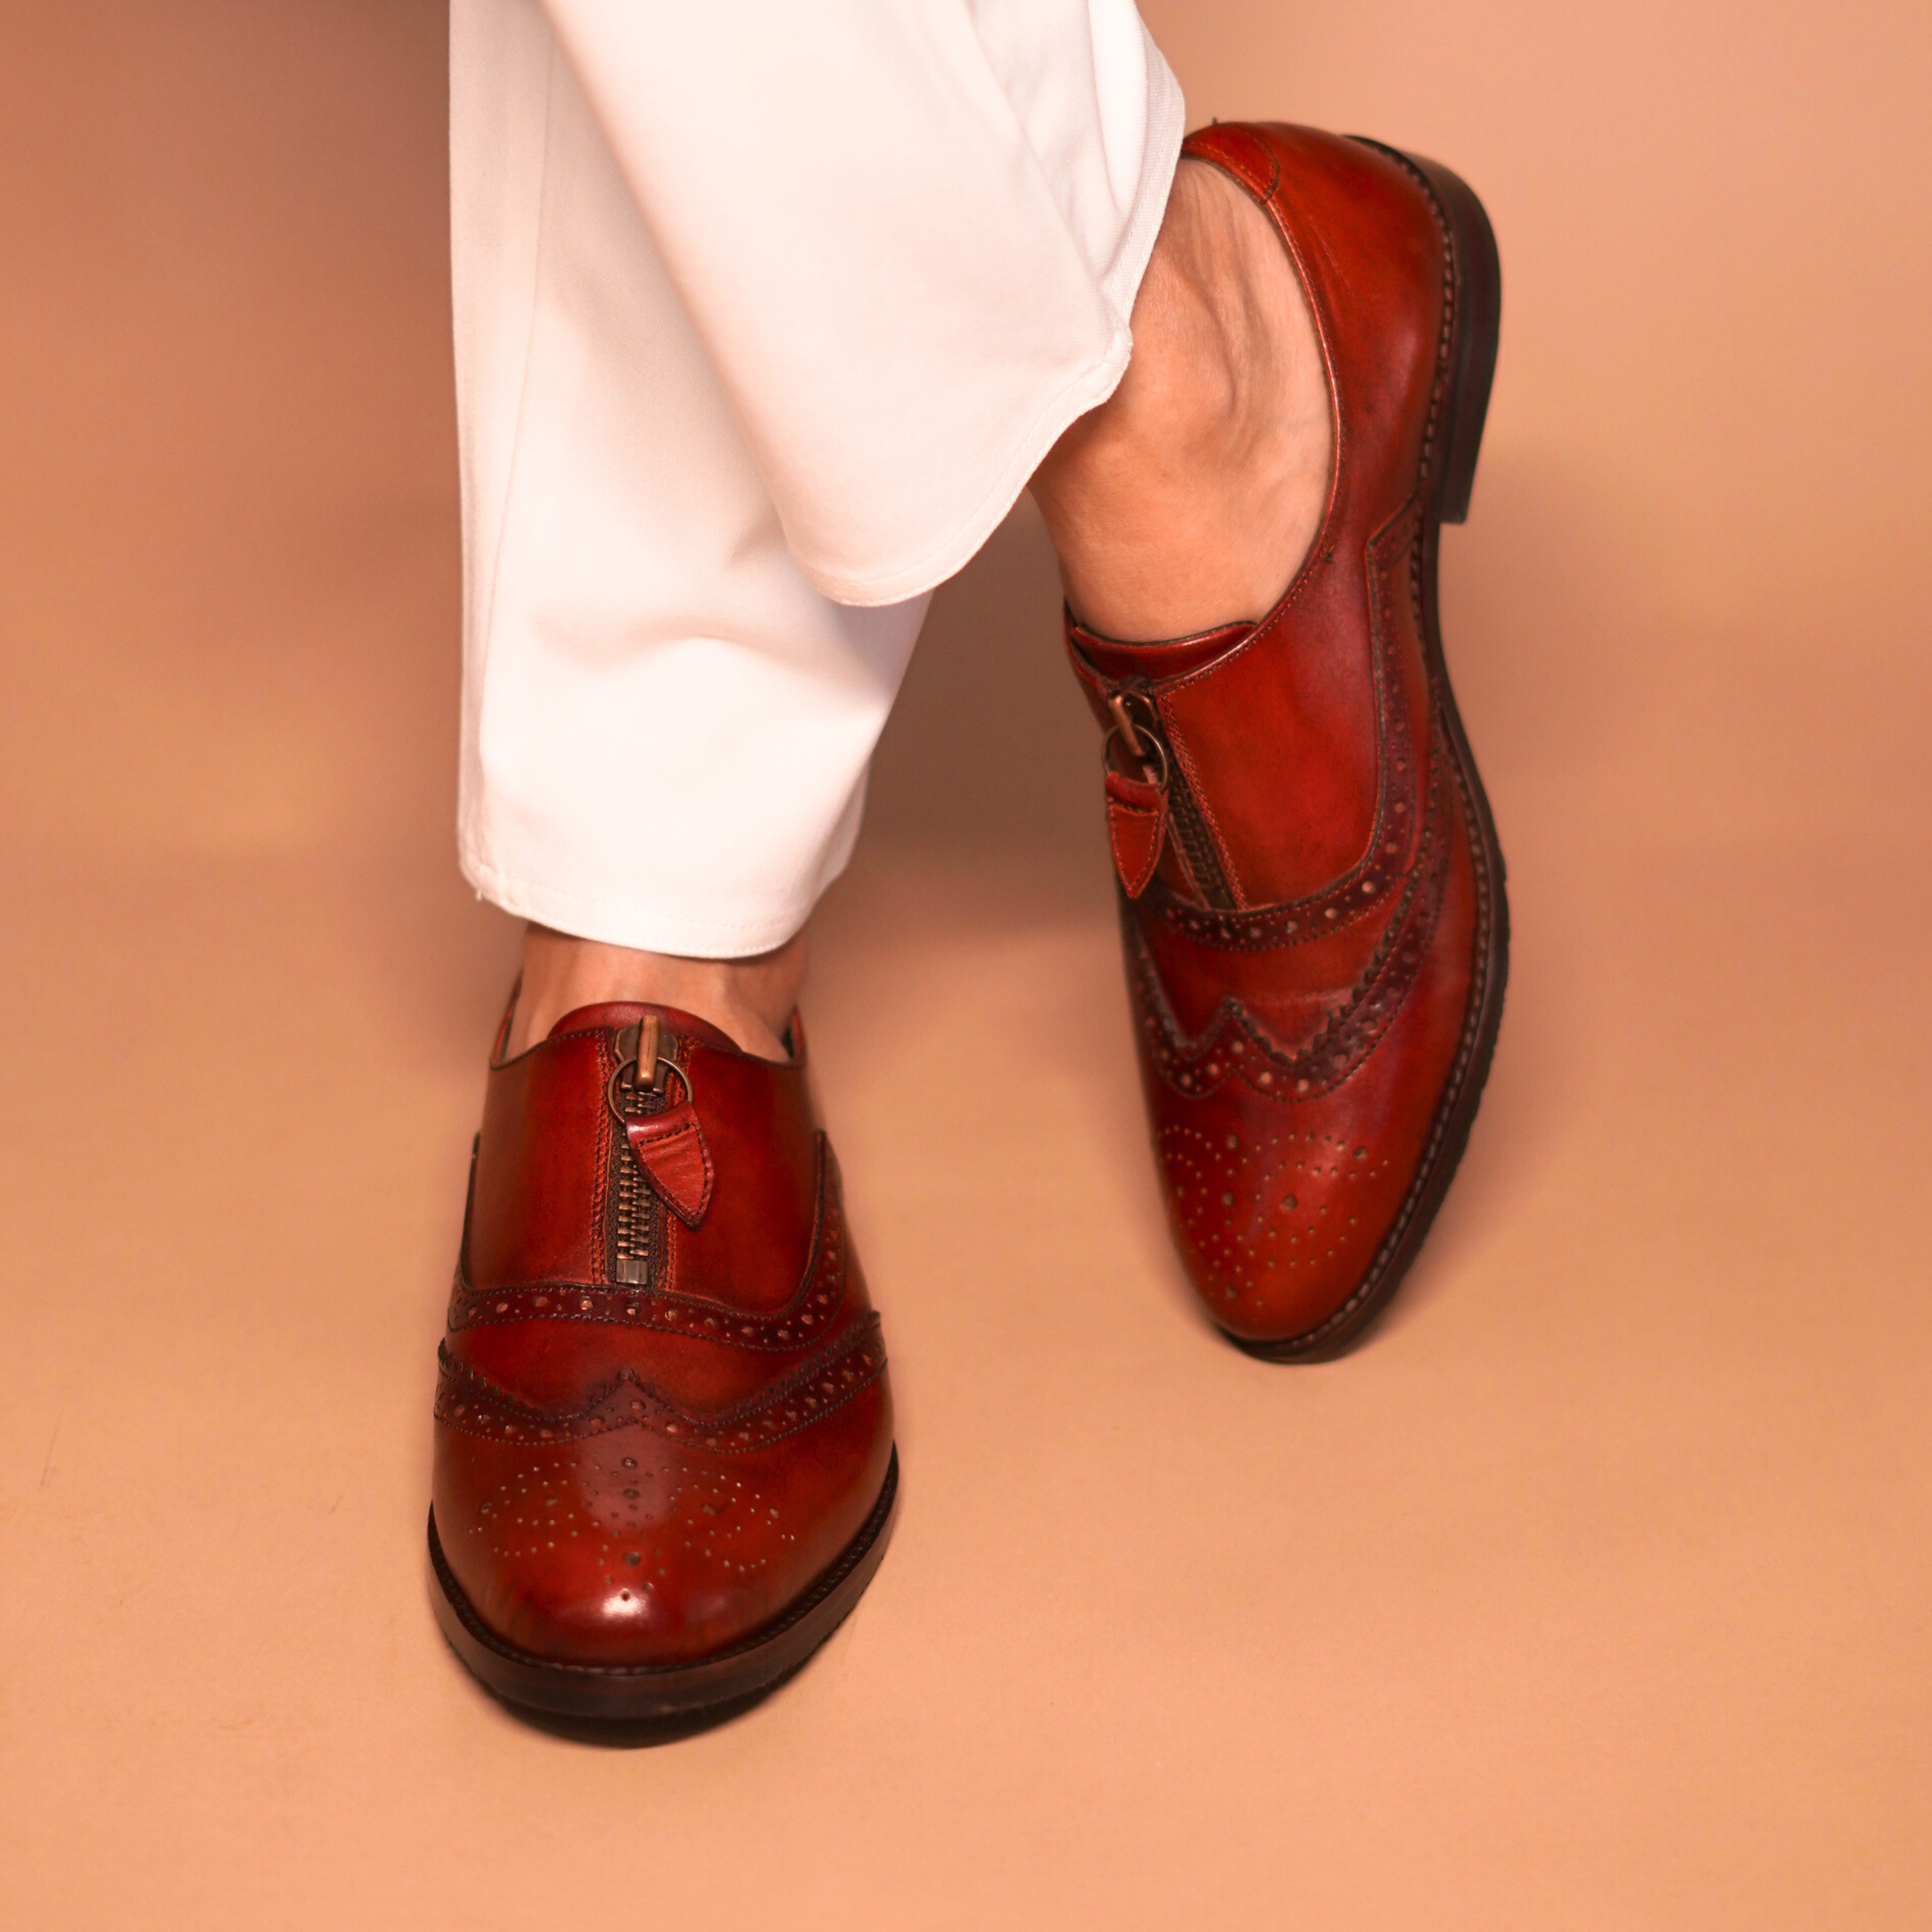 Bordo Leather Oxfords by dmodot with detailed wingtip captoe, intricate broguing, and unique central zip on rich dual-tone finish